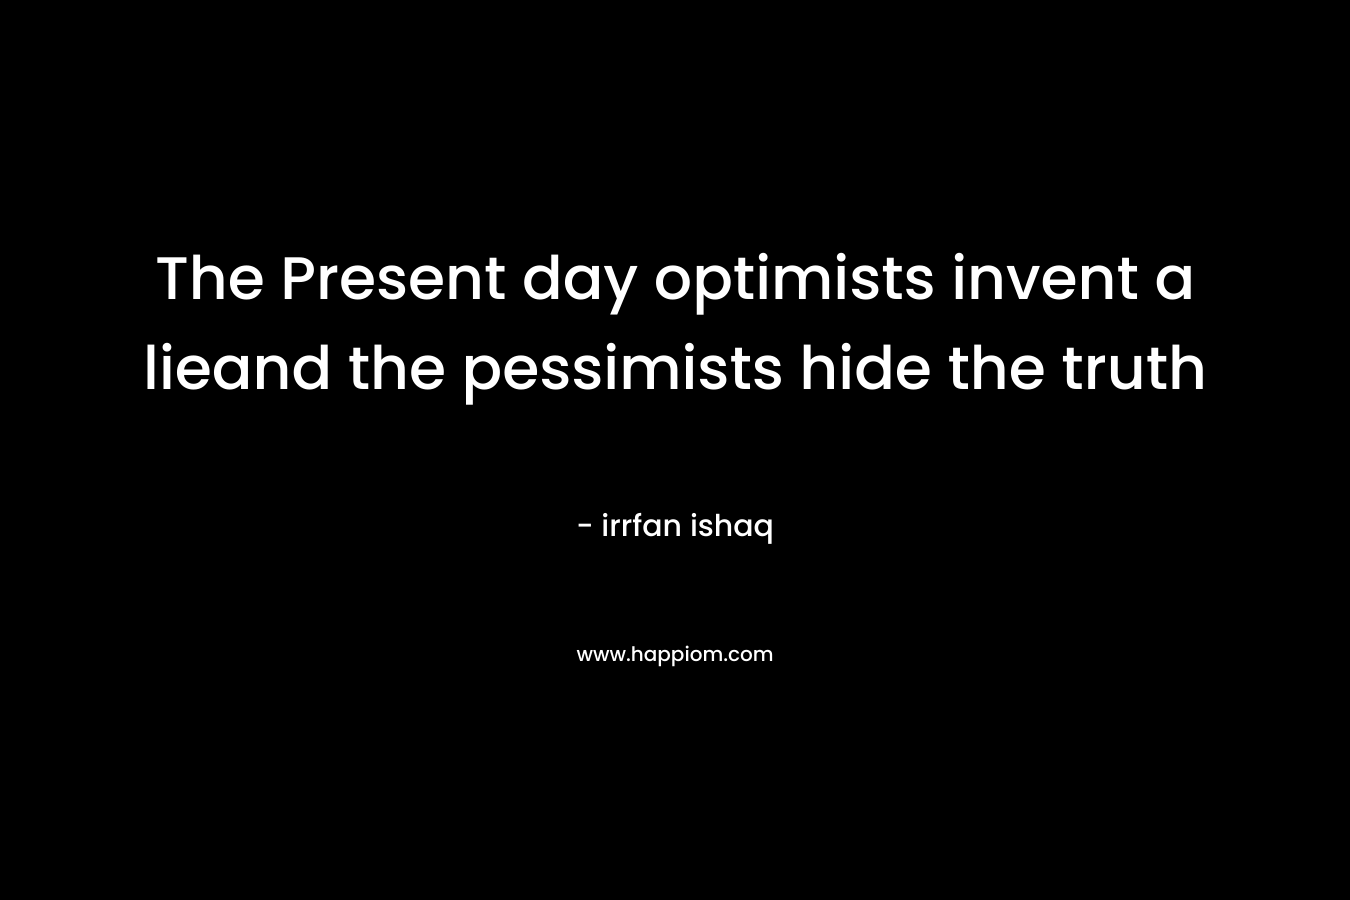 The Present day optimists invent a lieand the pessimists hide the truth – irrfan ishaq